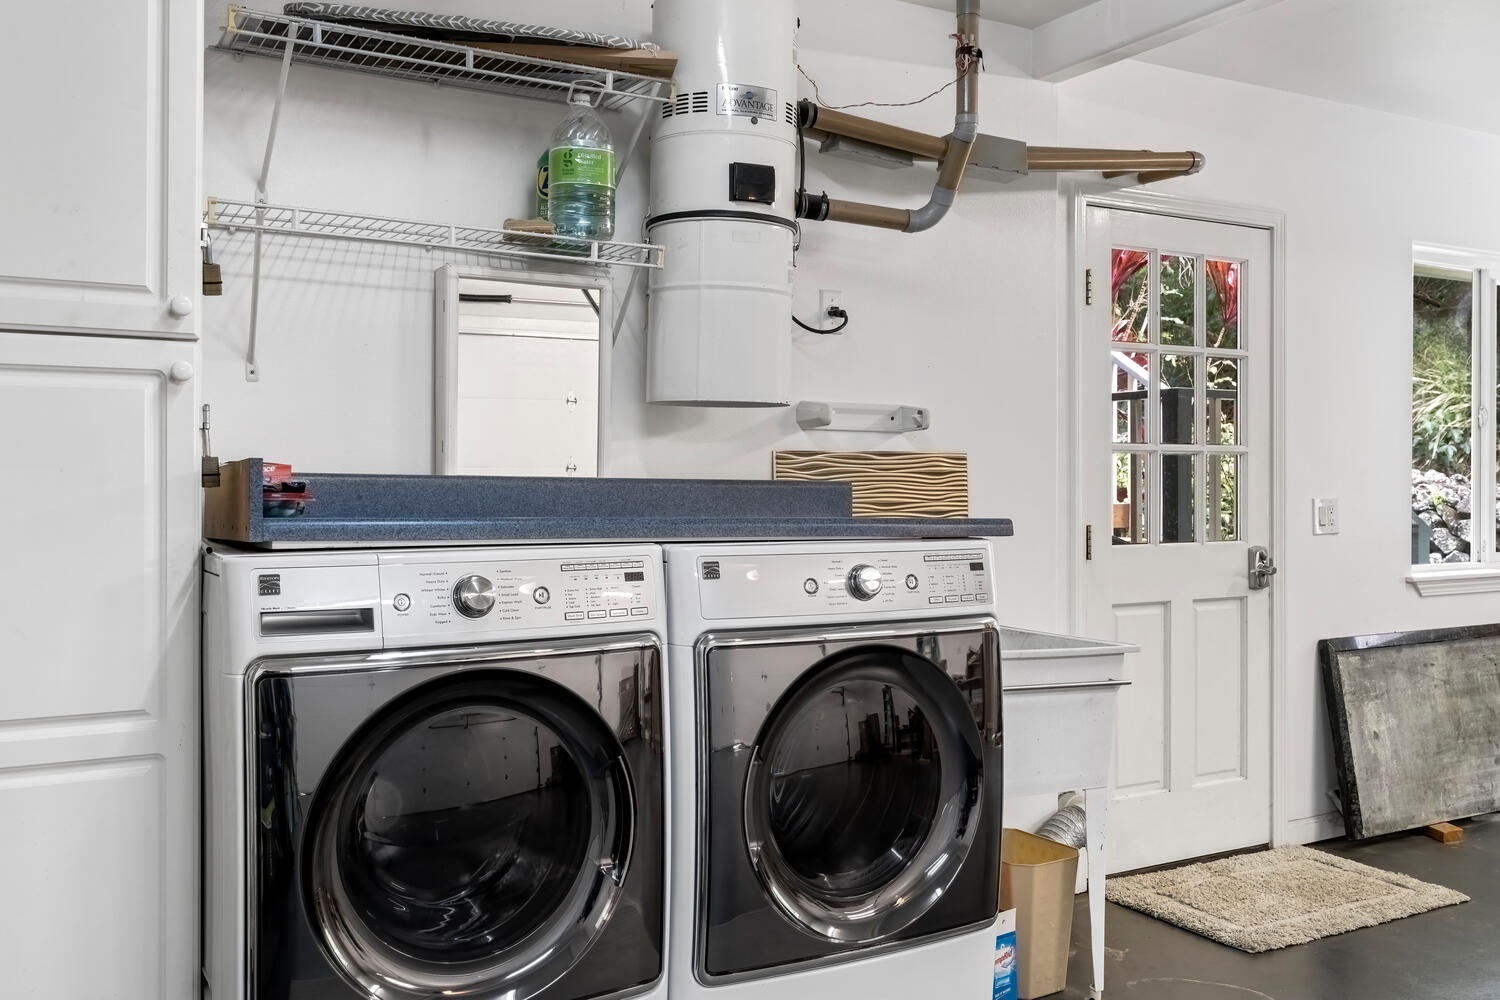 Kailua Kona Vacation Rentals, Honu O Kai (Turtle of the Sea) - Washer and dryer in the garage